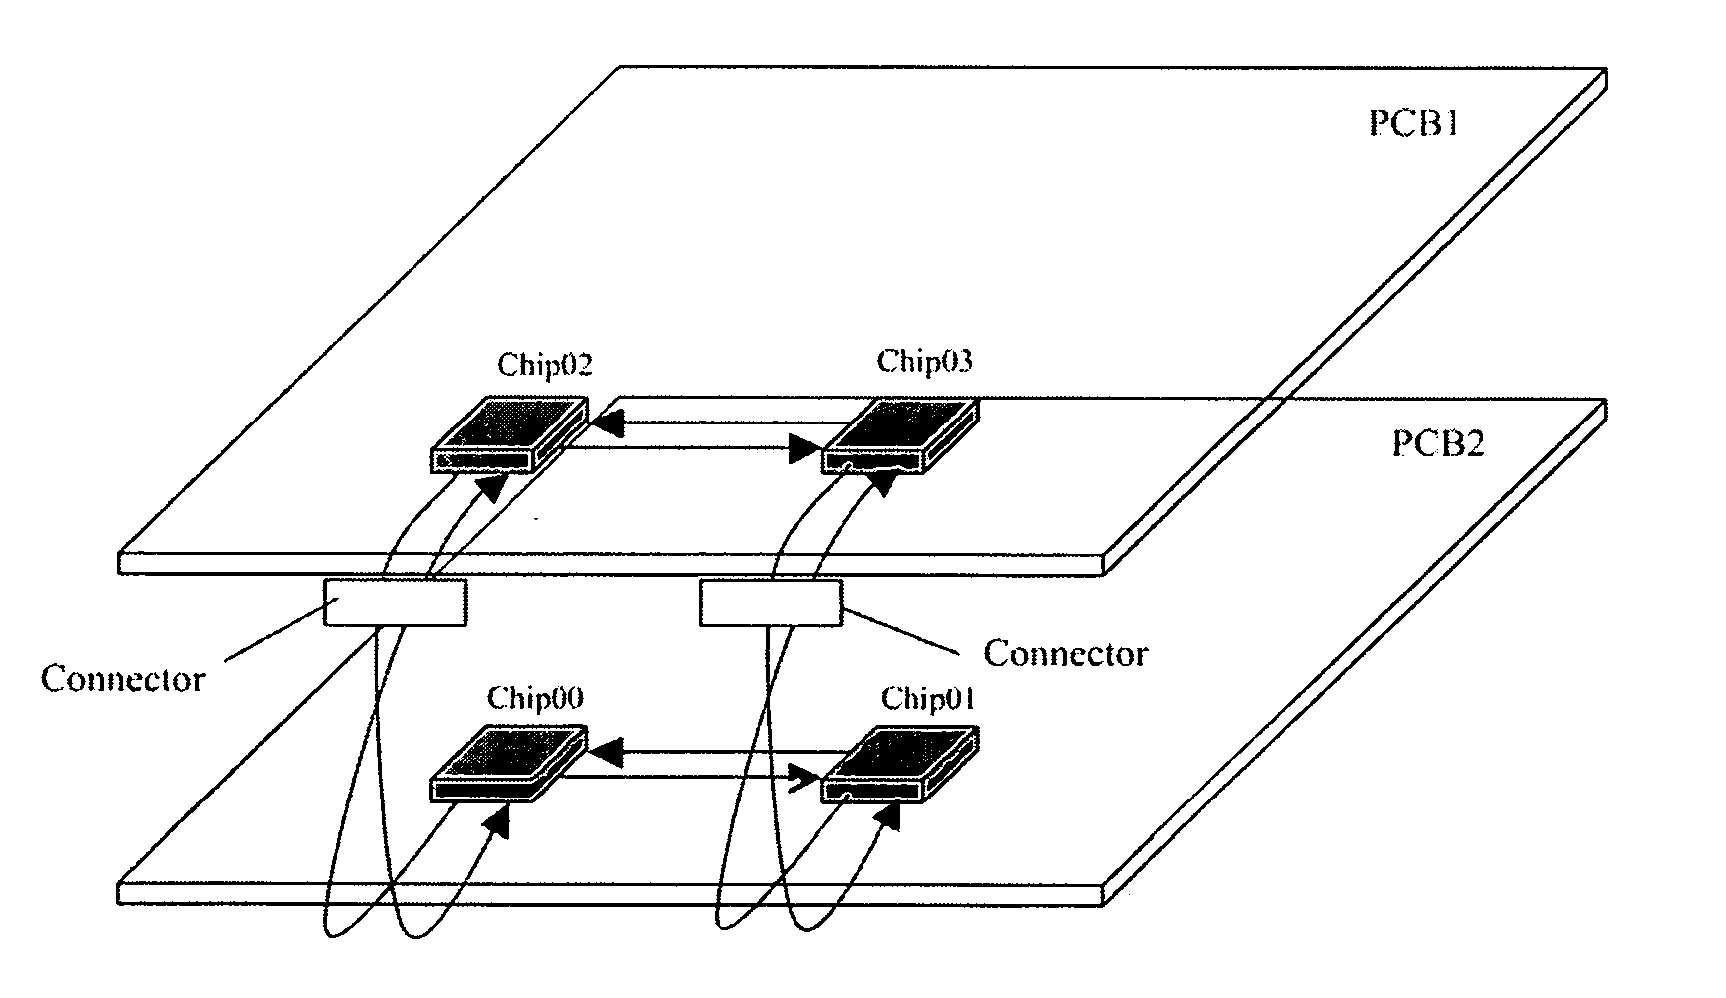 Interconnect structure between HyperTransport bus interface boards